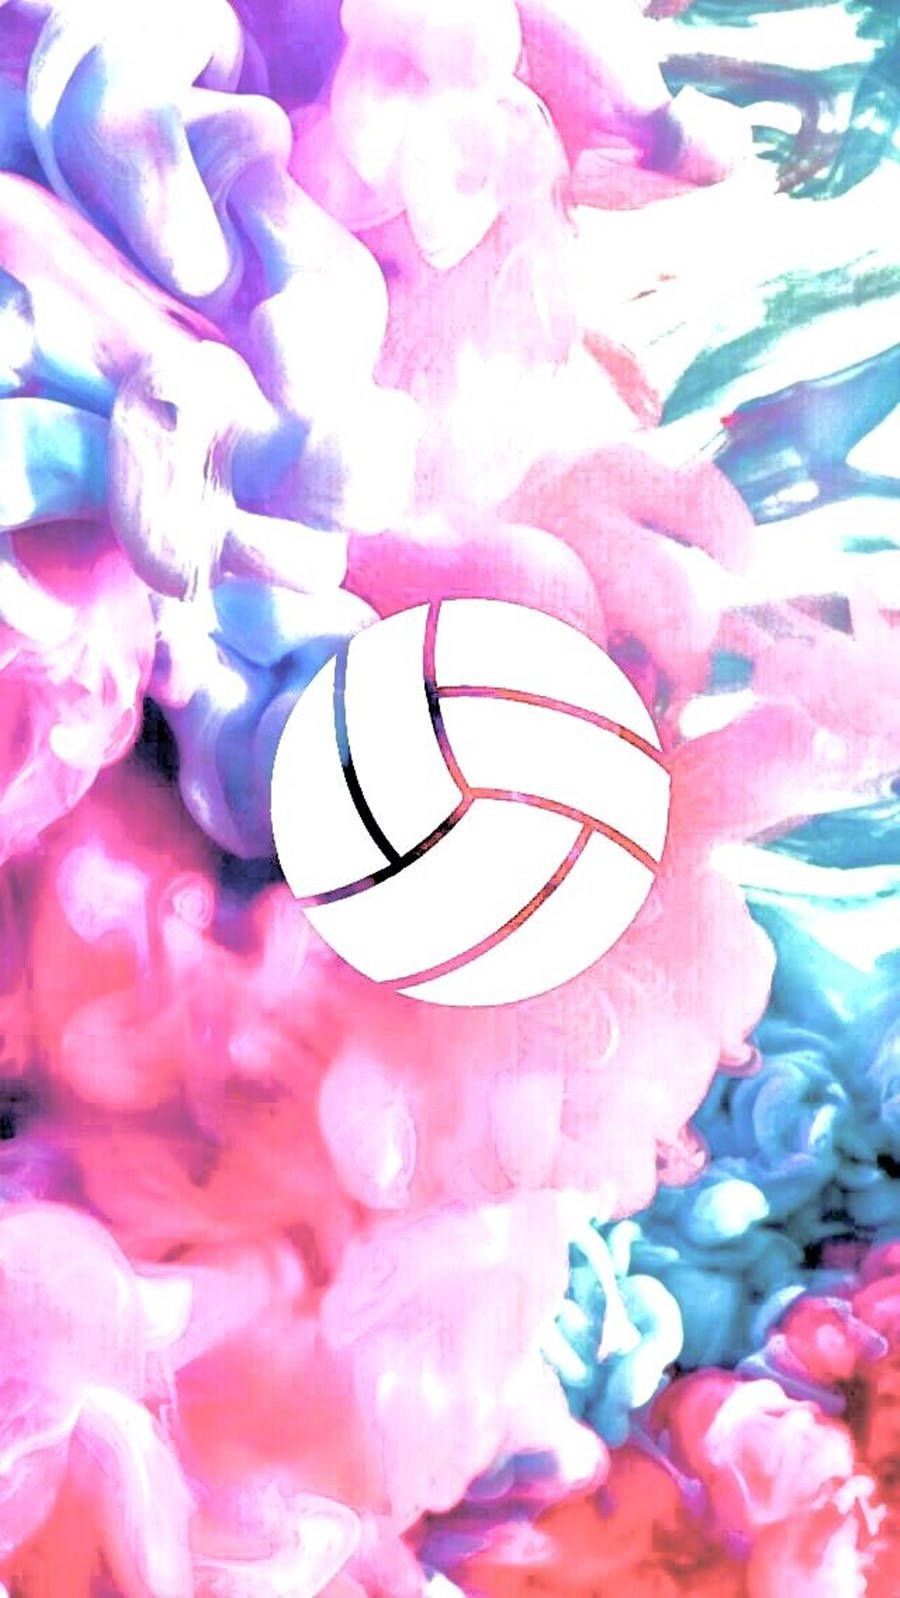 Download Volleyball Aesthetic Colored Smoke Background Wallpaper